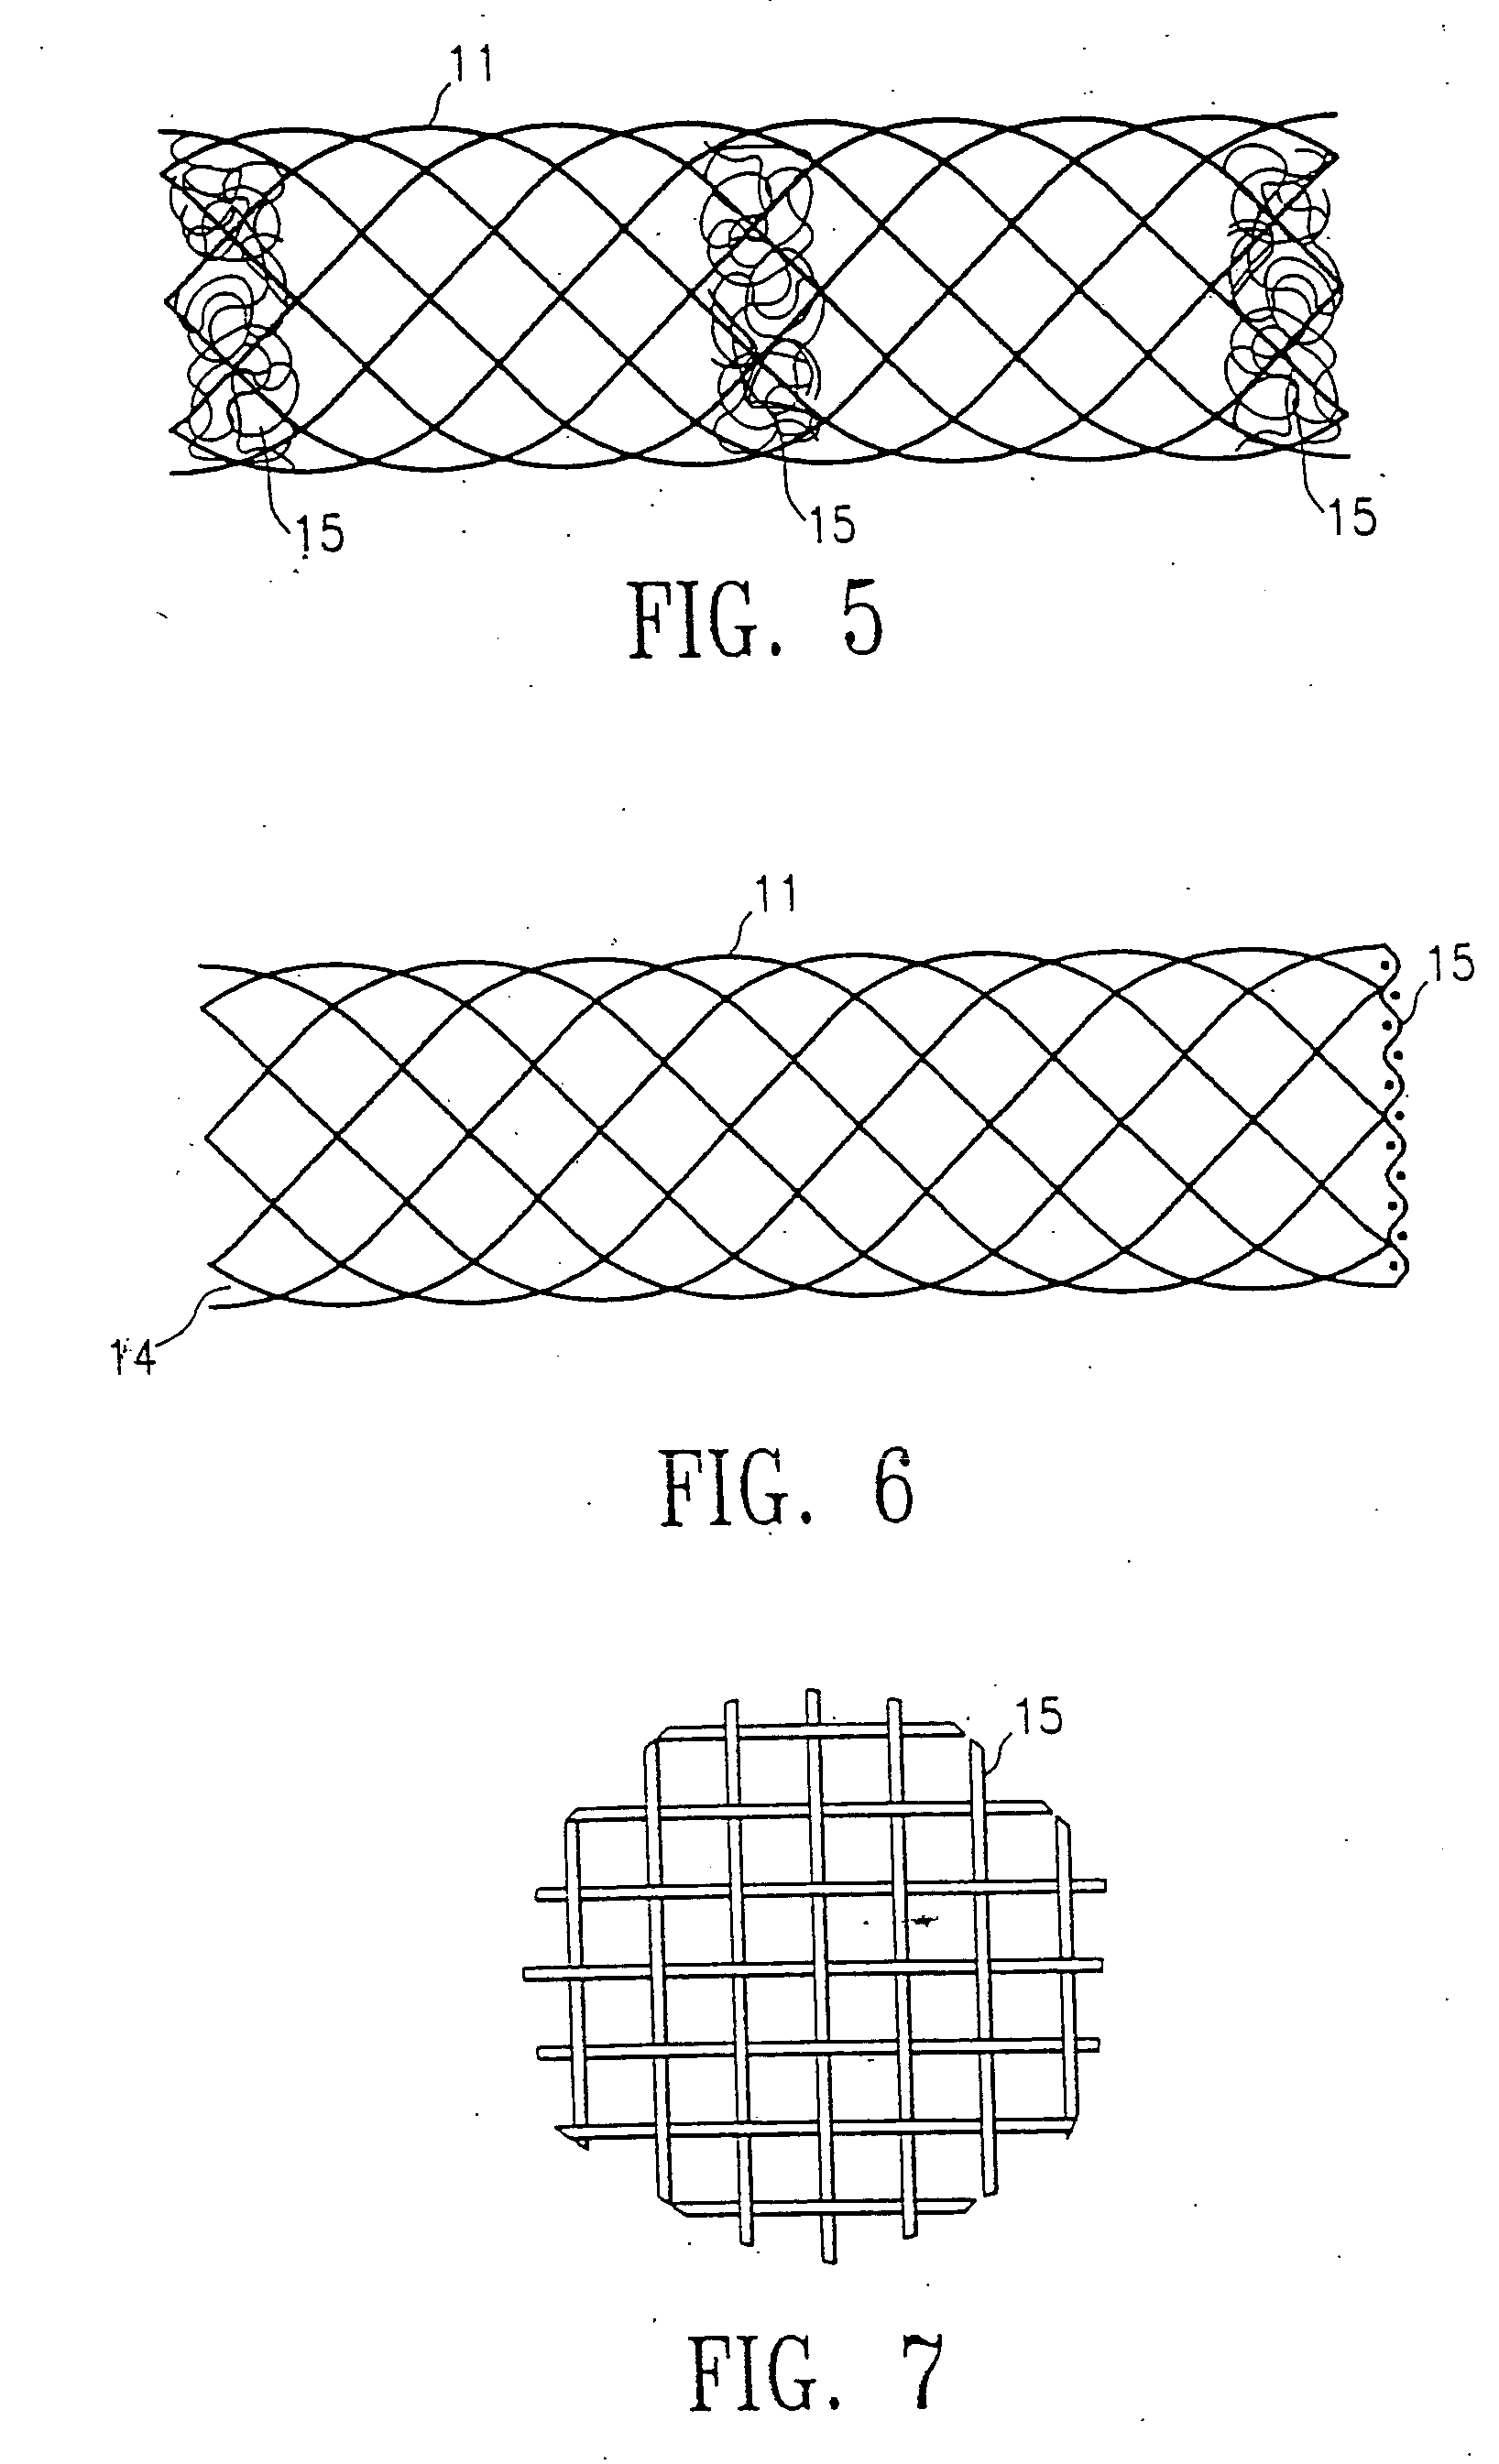 Occluding device and method of use